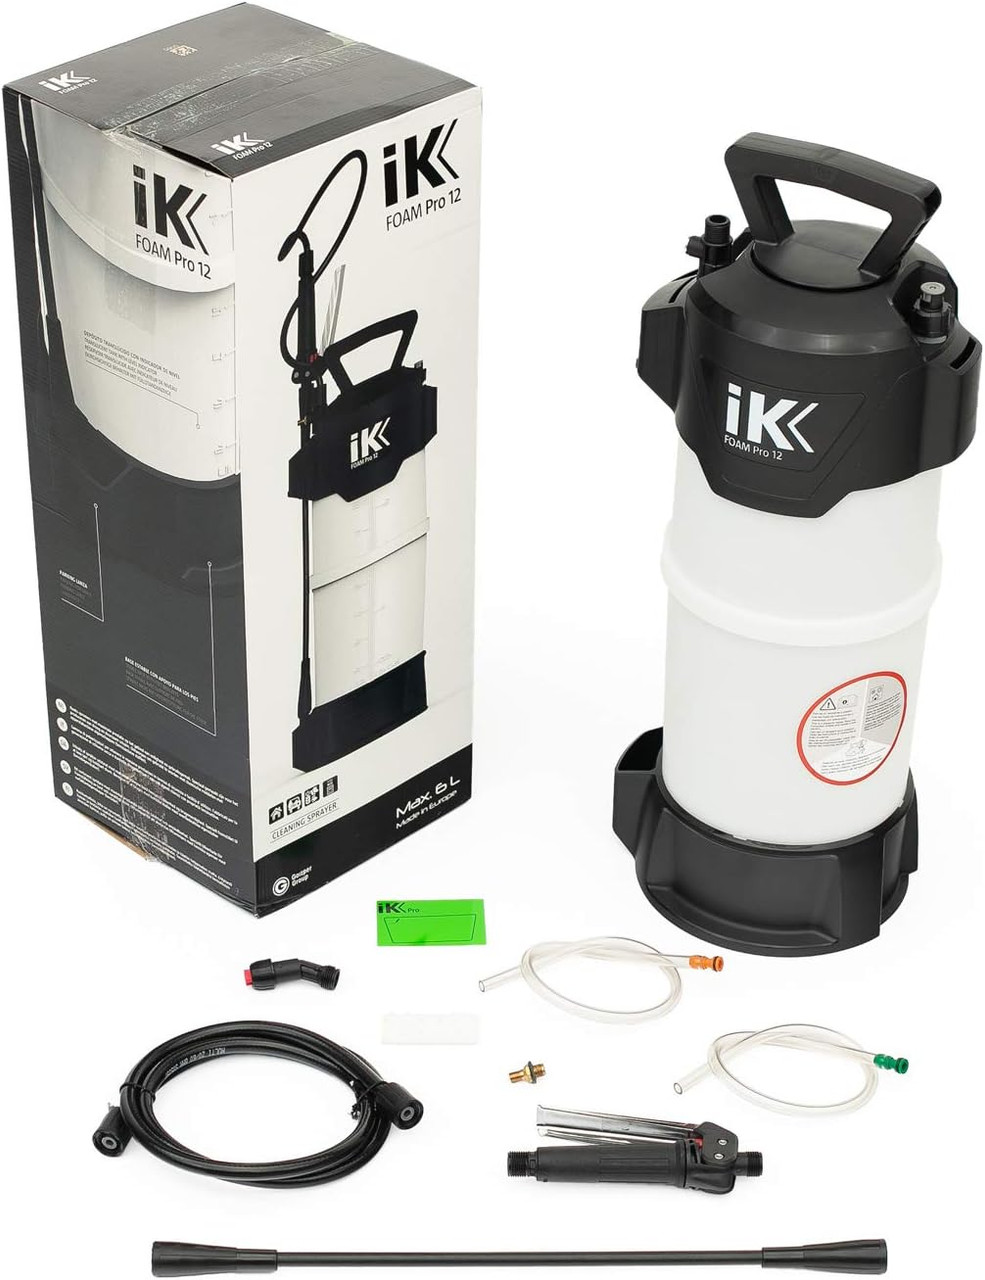 GOING PRO 2: All About the New iK Pro 2 Foam & Multi Sprayers 